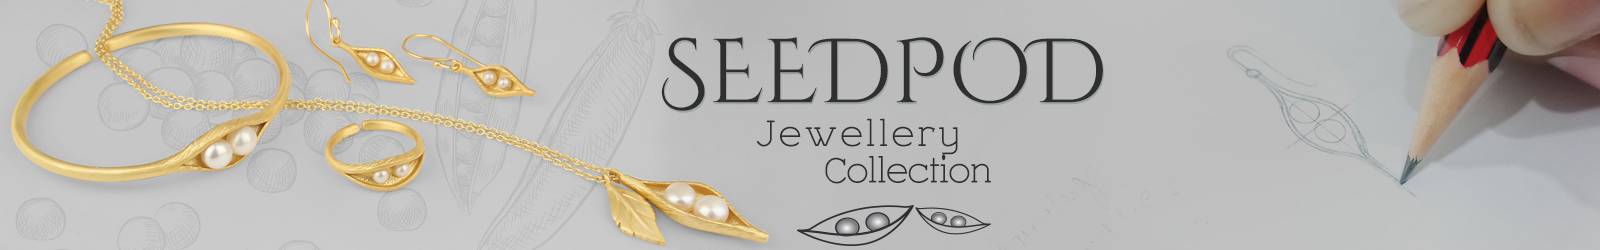 Wholesale Textured Seedpod Silver Jewelry Manufacturer in Jaipur